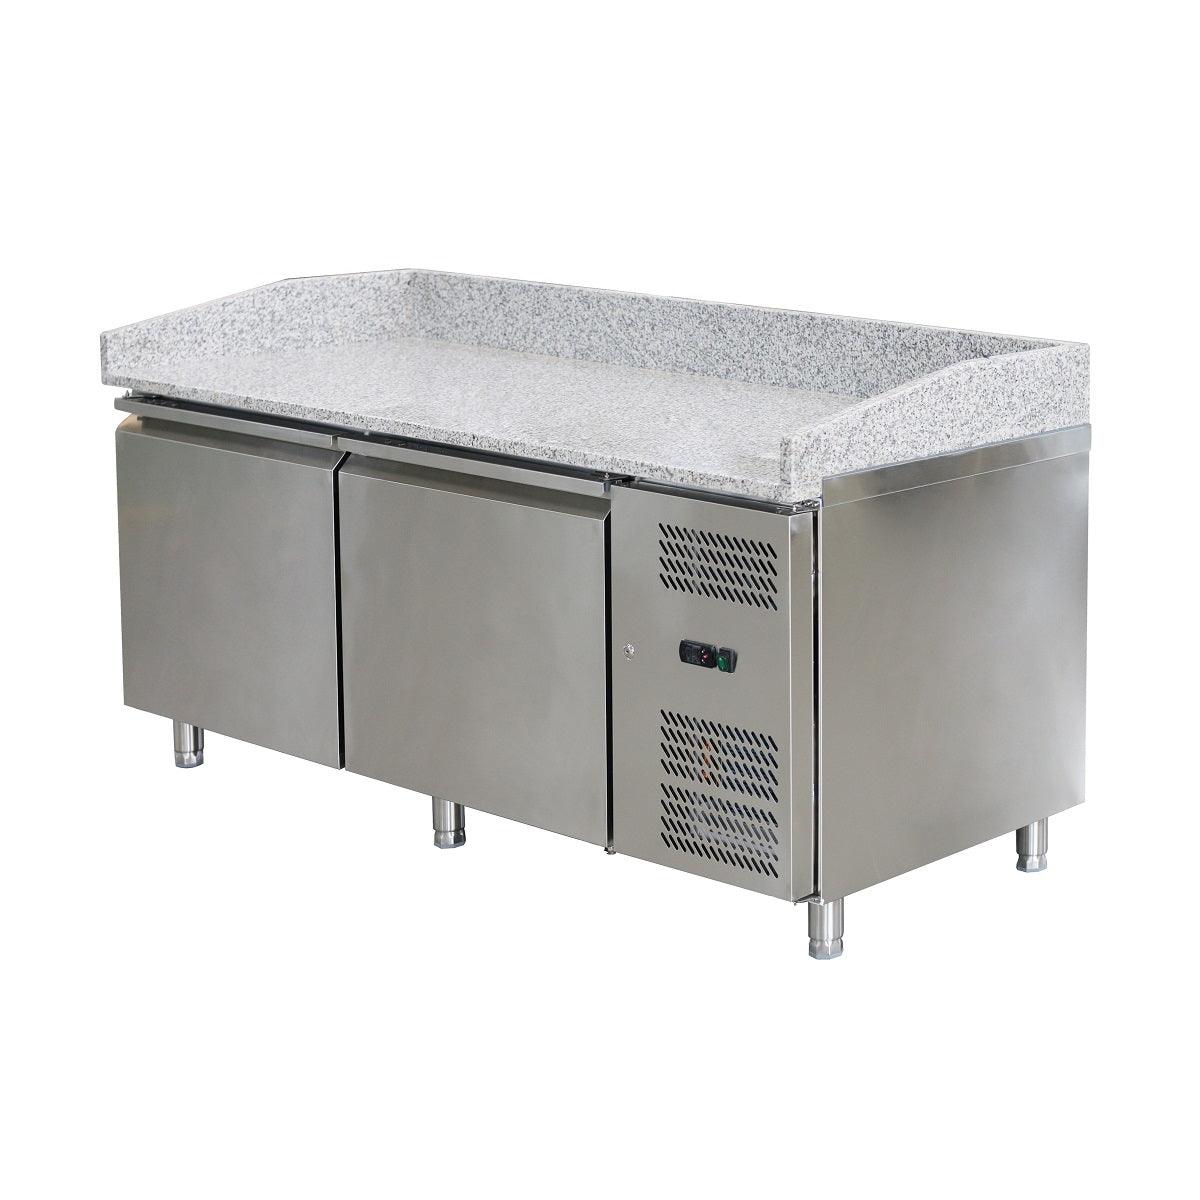 Omcan PT-CN-0580-2 80-inch Granite Top Refrigerated Pizza Prep Table with 2 doors